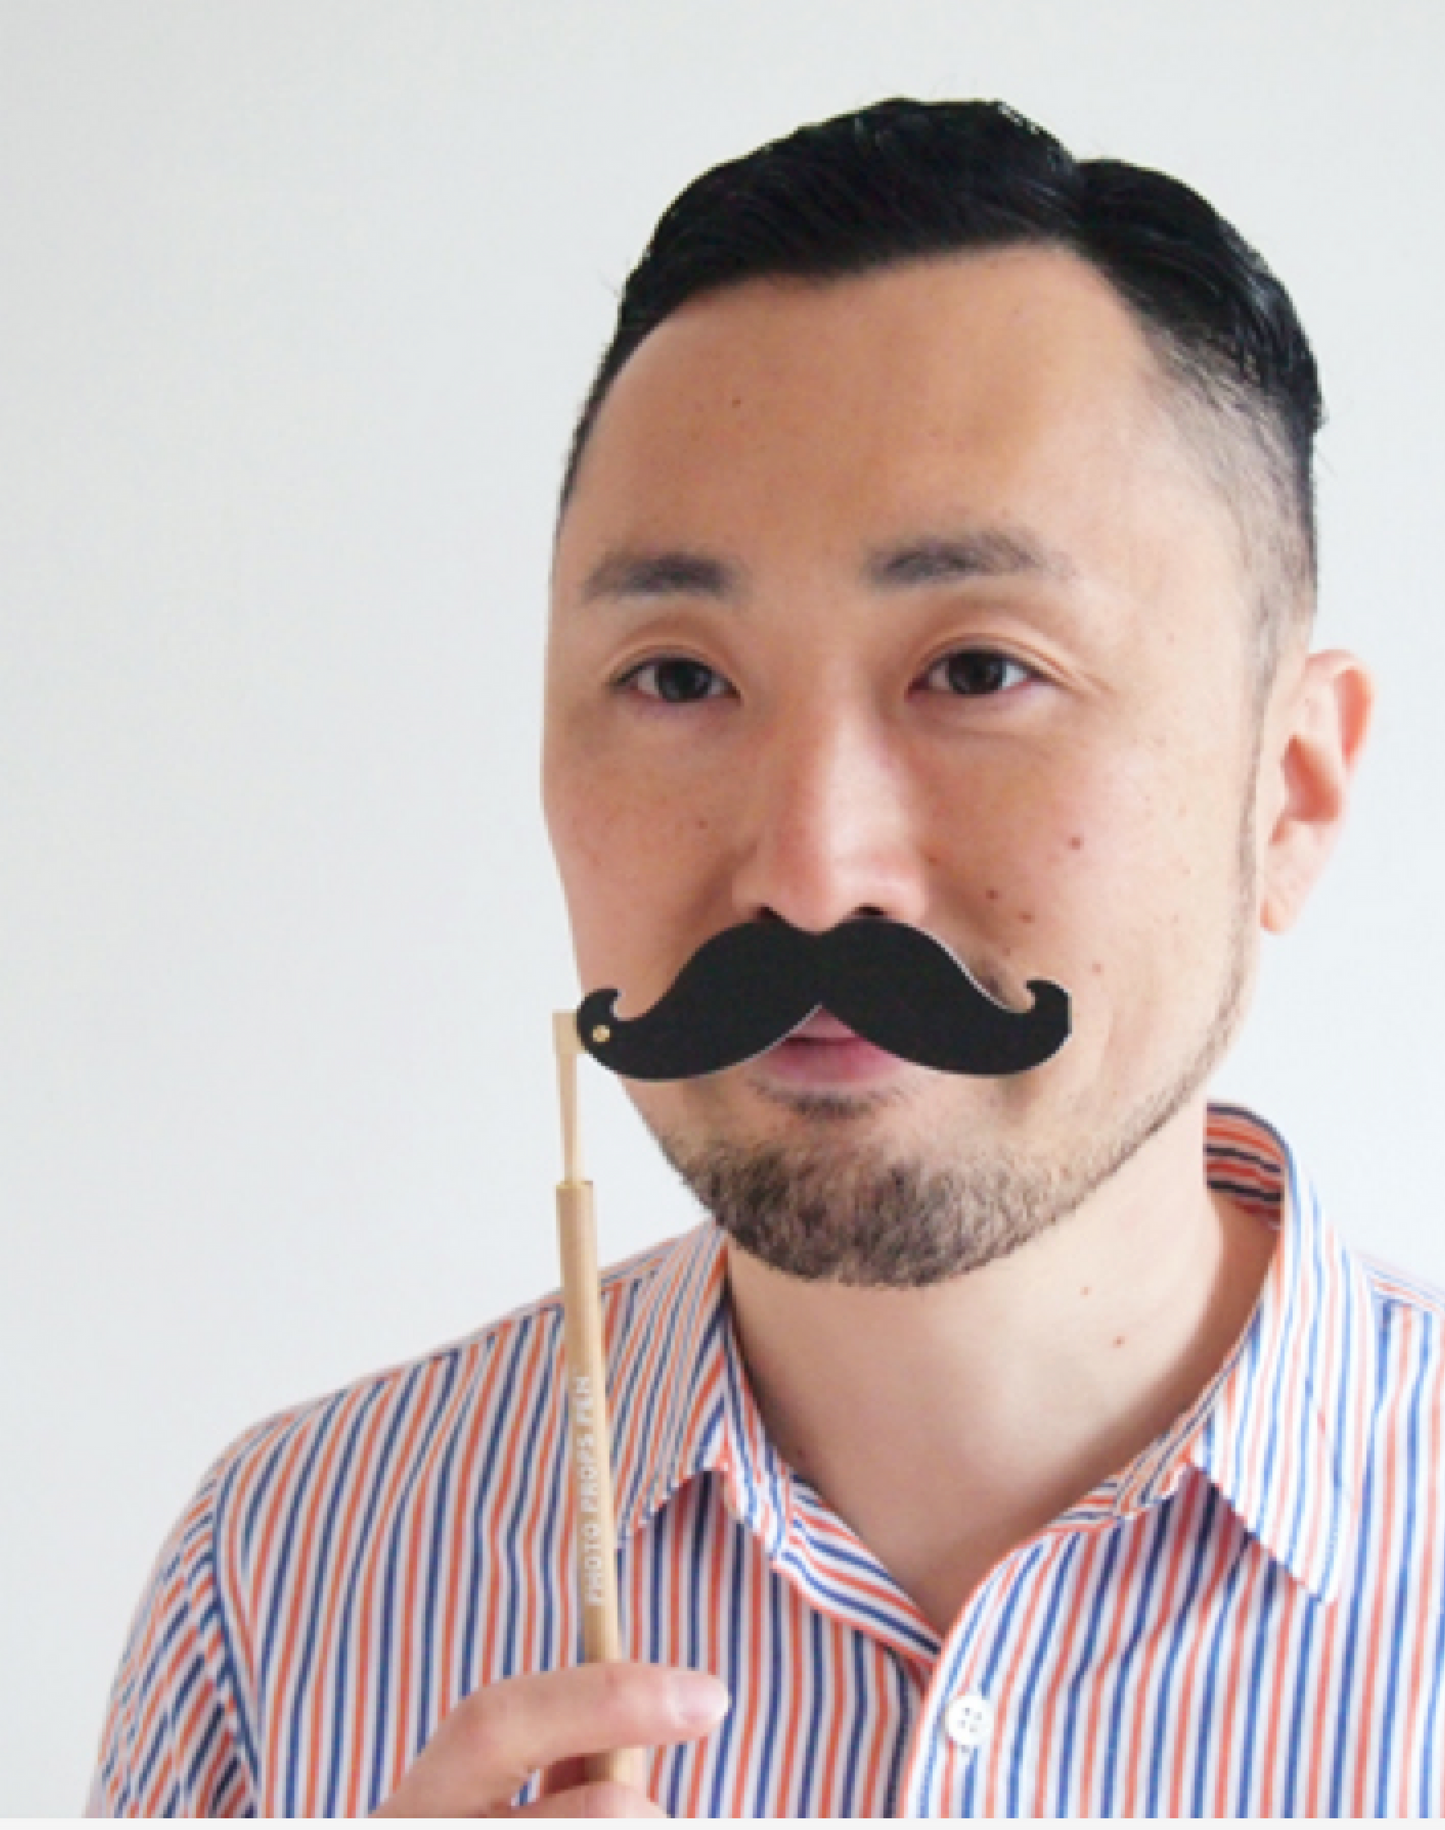 A man is trying a mustache photo props pen